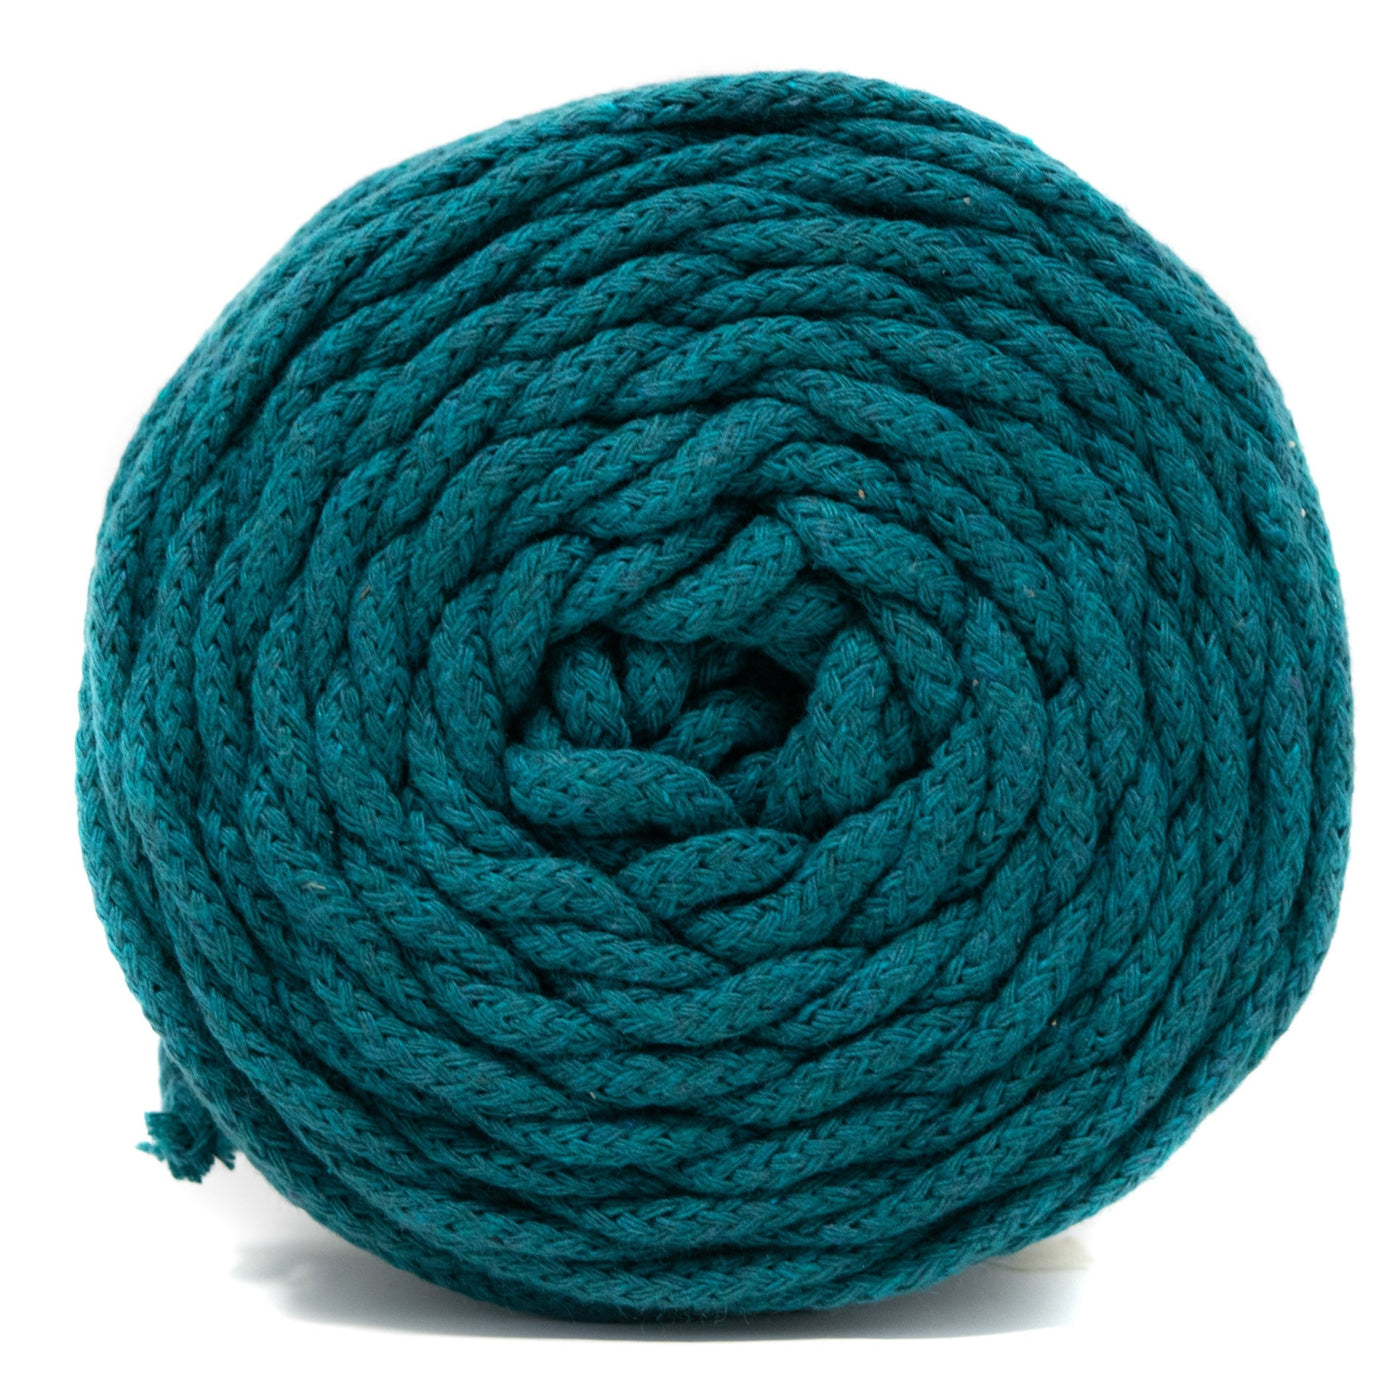 COTTON AIR 6 MM ZERO WASTE - TEAL COLOR